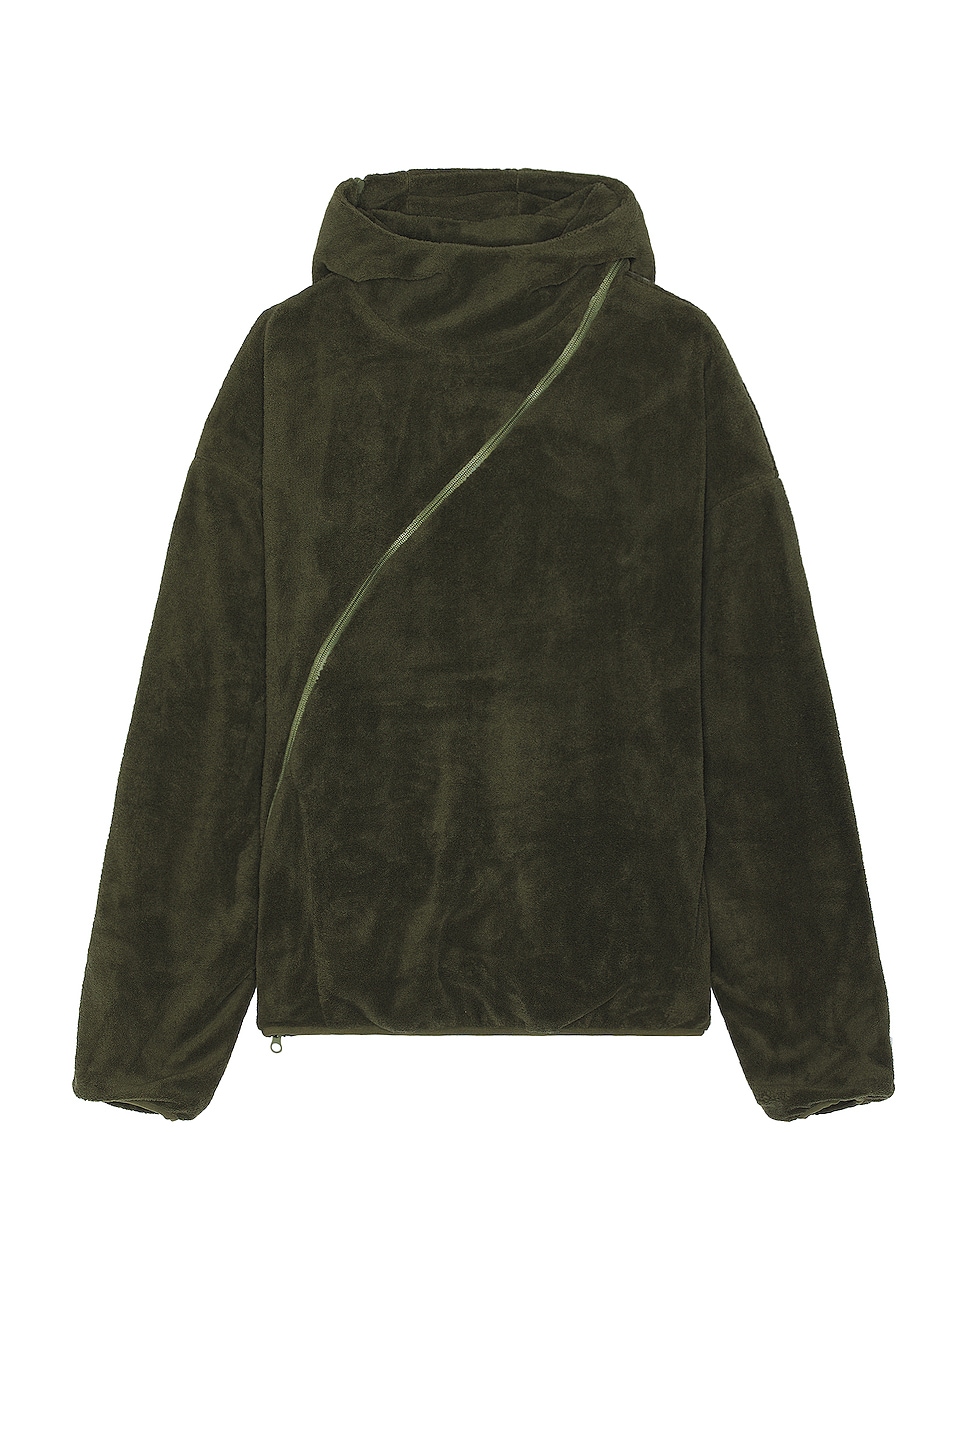 Худи Post Archive Faction (Paf) 5.1 Center, цвет OLIVE GREEN paf archive faction jacket loose stitching zipper lamb wool men 1 1 high quality far archive casual jackets